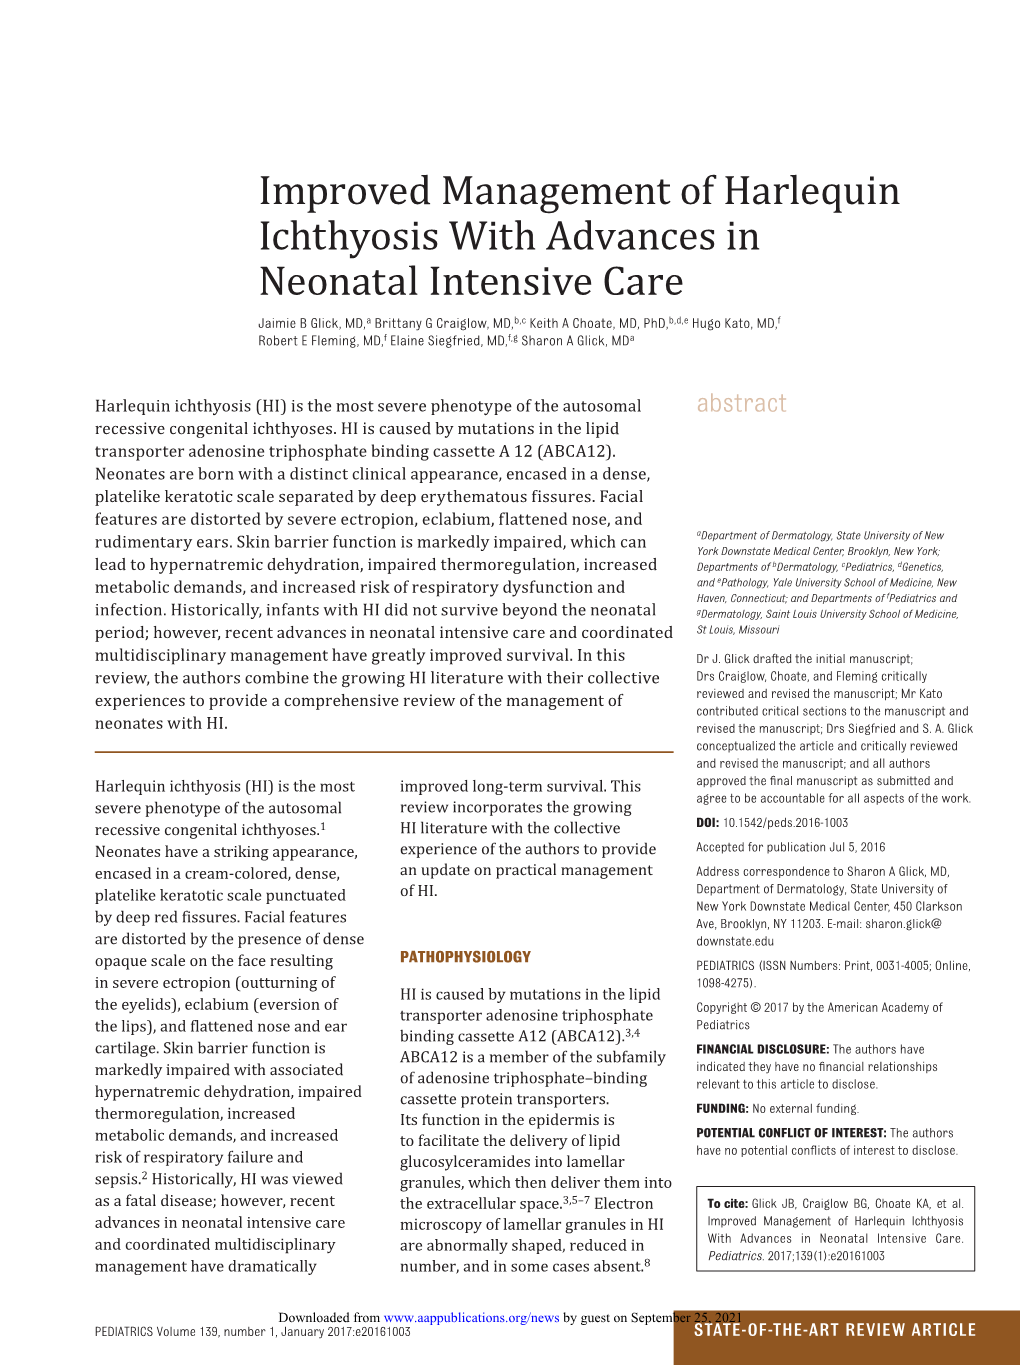 Improved Management of Harlequin Ichthyosis with Advances In